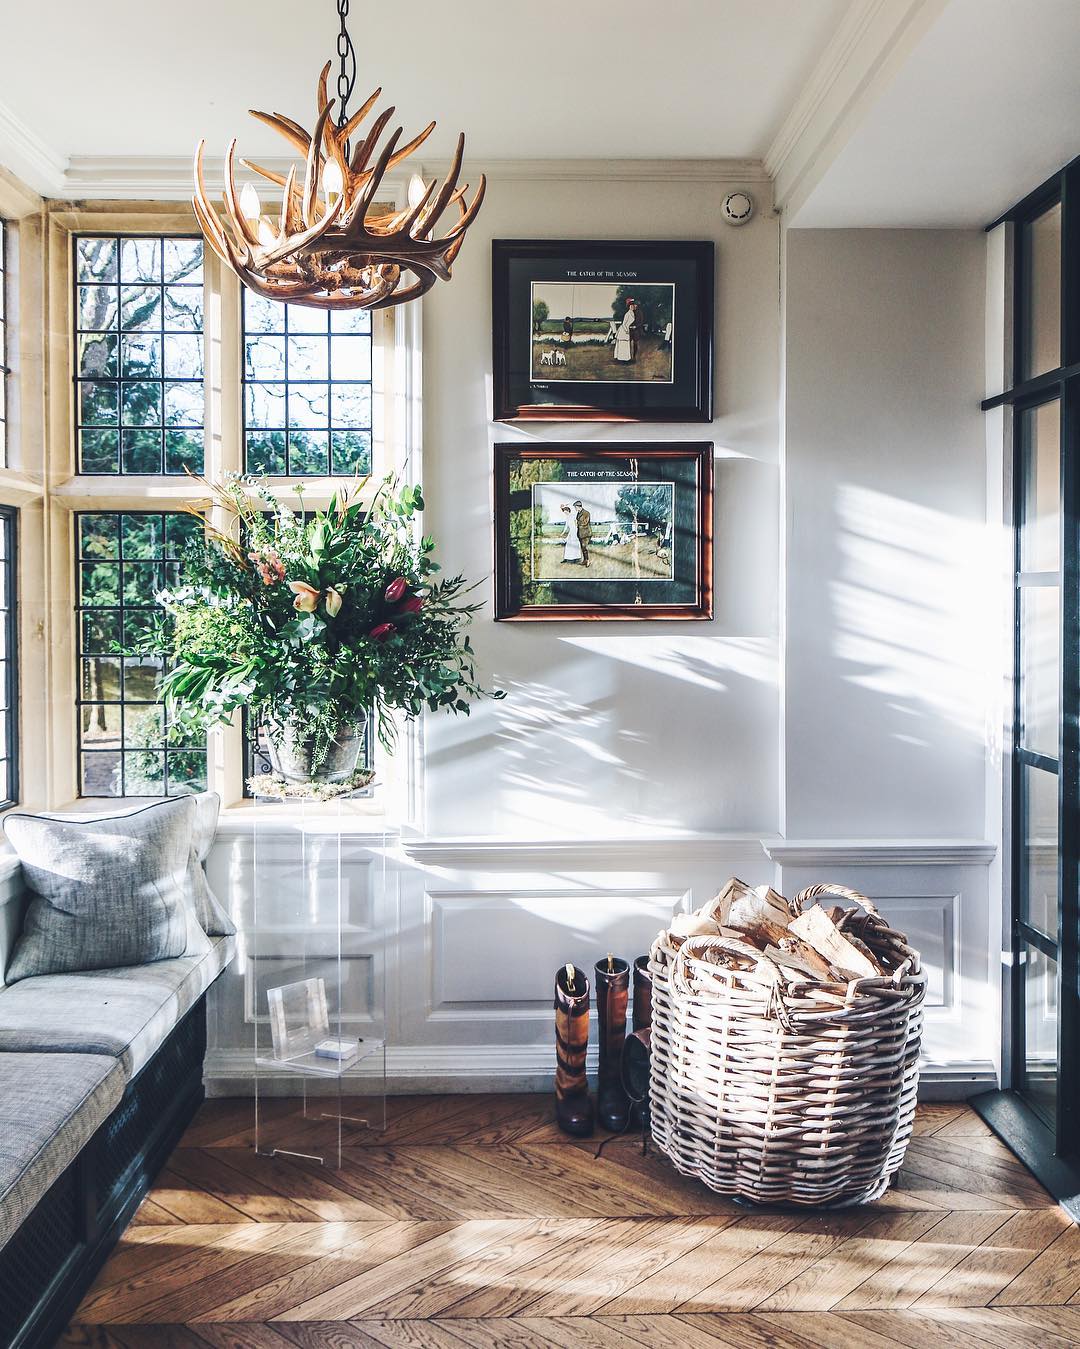 The sweet entrance, Leanne Ford Interiors, & More in Daily Inspiration ...